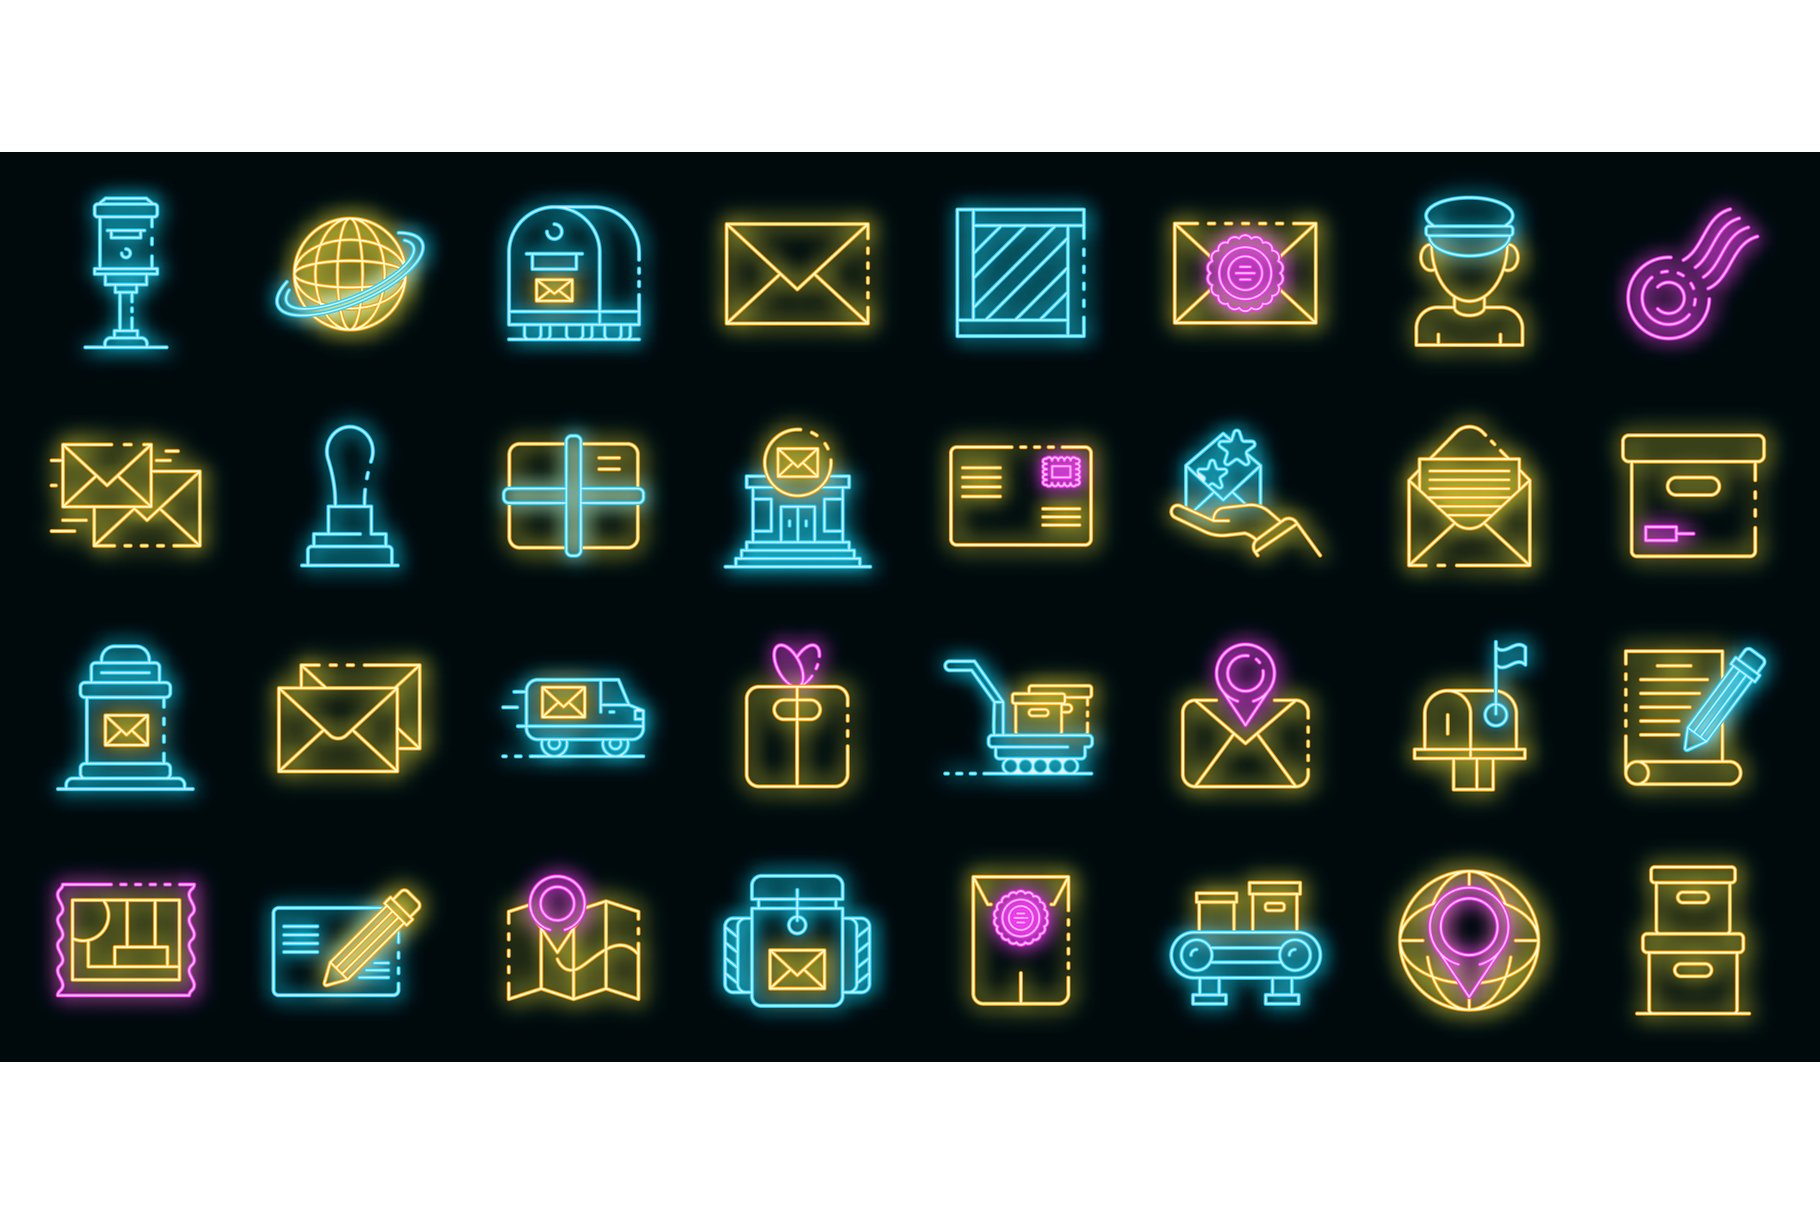 Postman icons set vector neon cover image.